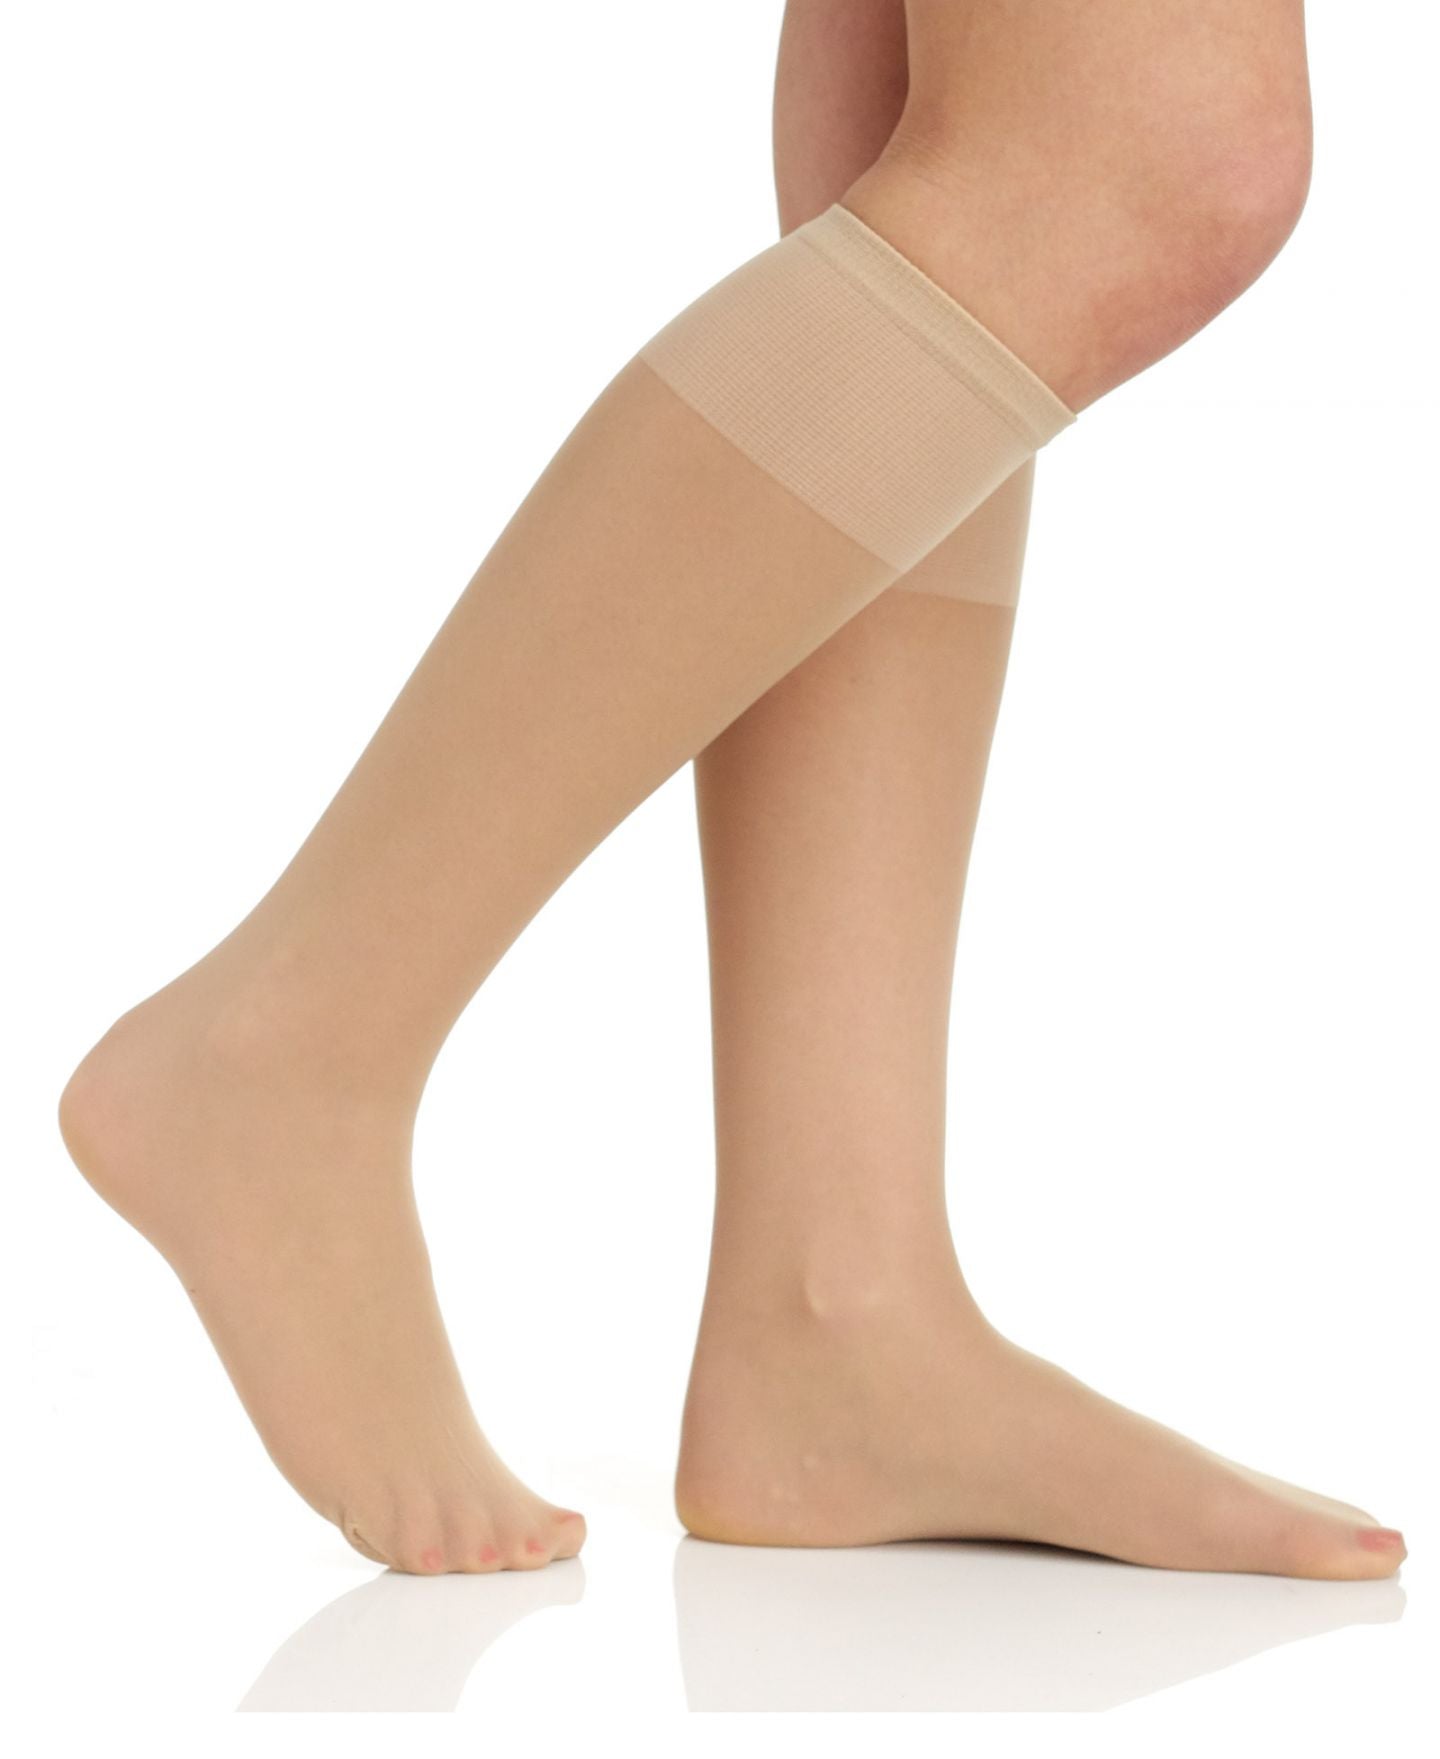 Sheer Support Knee High with Sandalfoot Toe